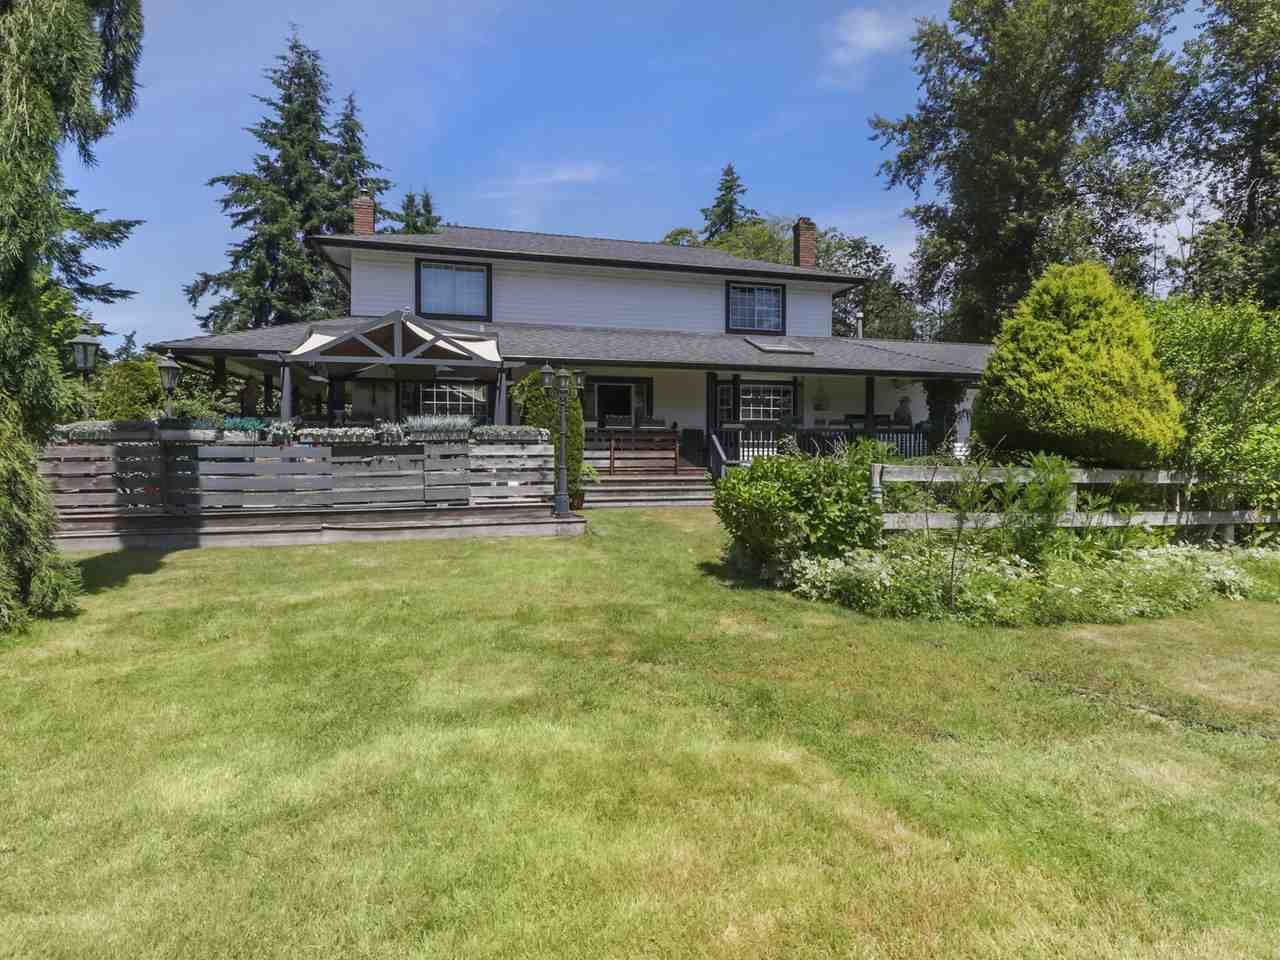 Main Photo: 13957 32 Avenue in Surrey: Elgin Chantrell House for sale (South Surrey White Rock)  : MLS®# R2466206